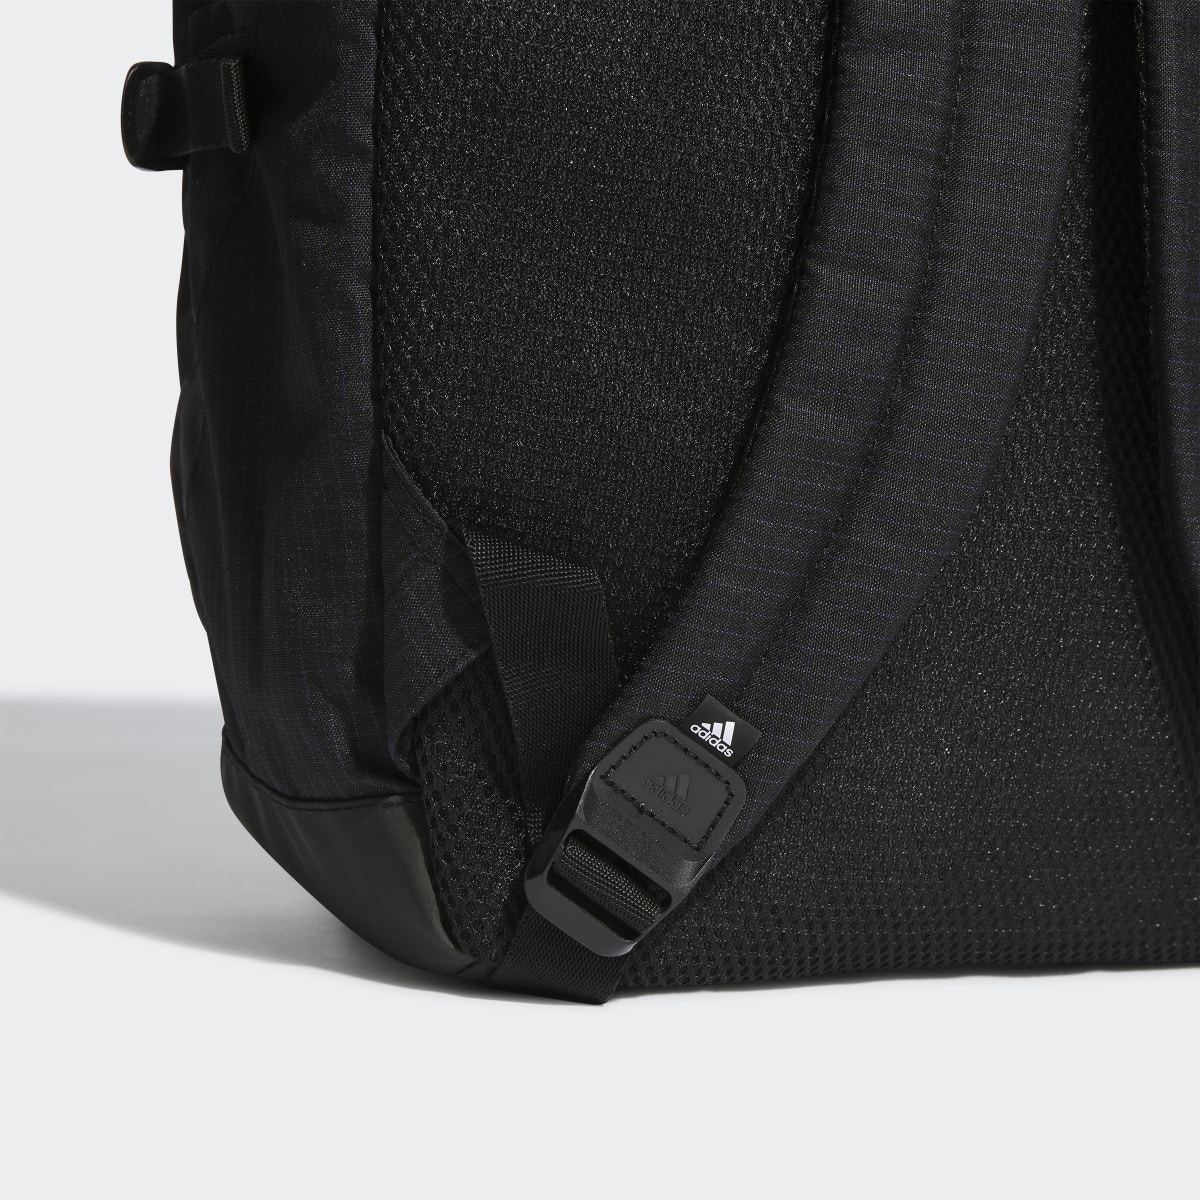 Adidas Back to School Backpack. 7